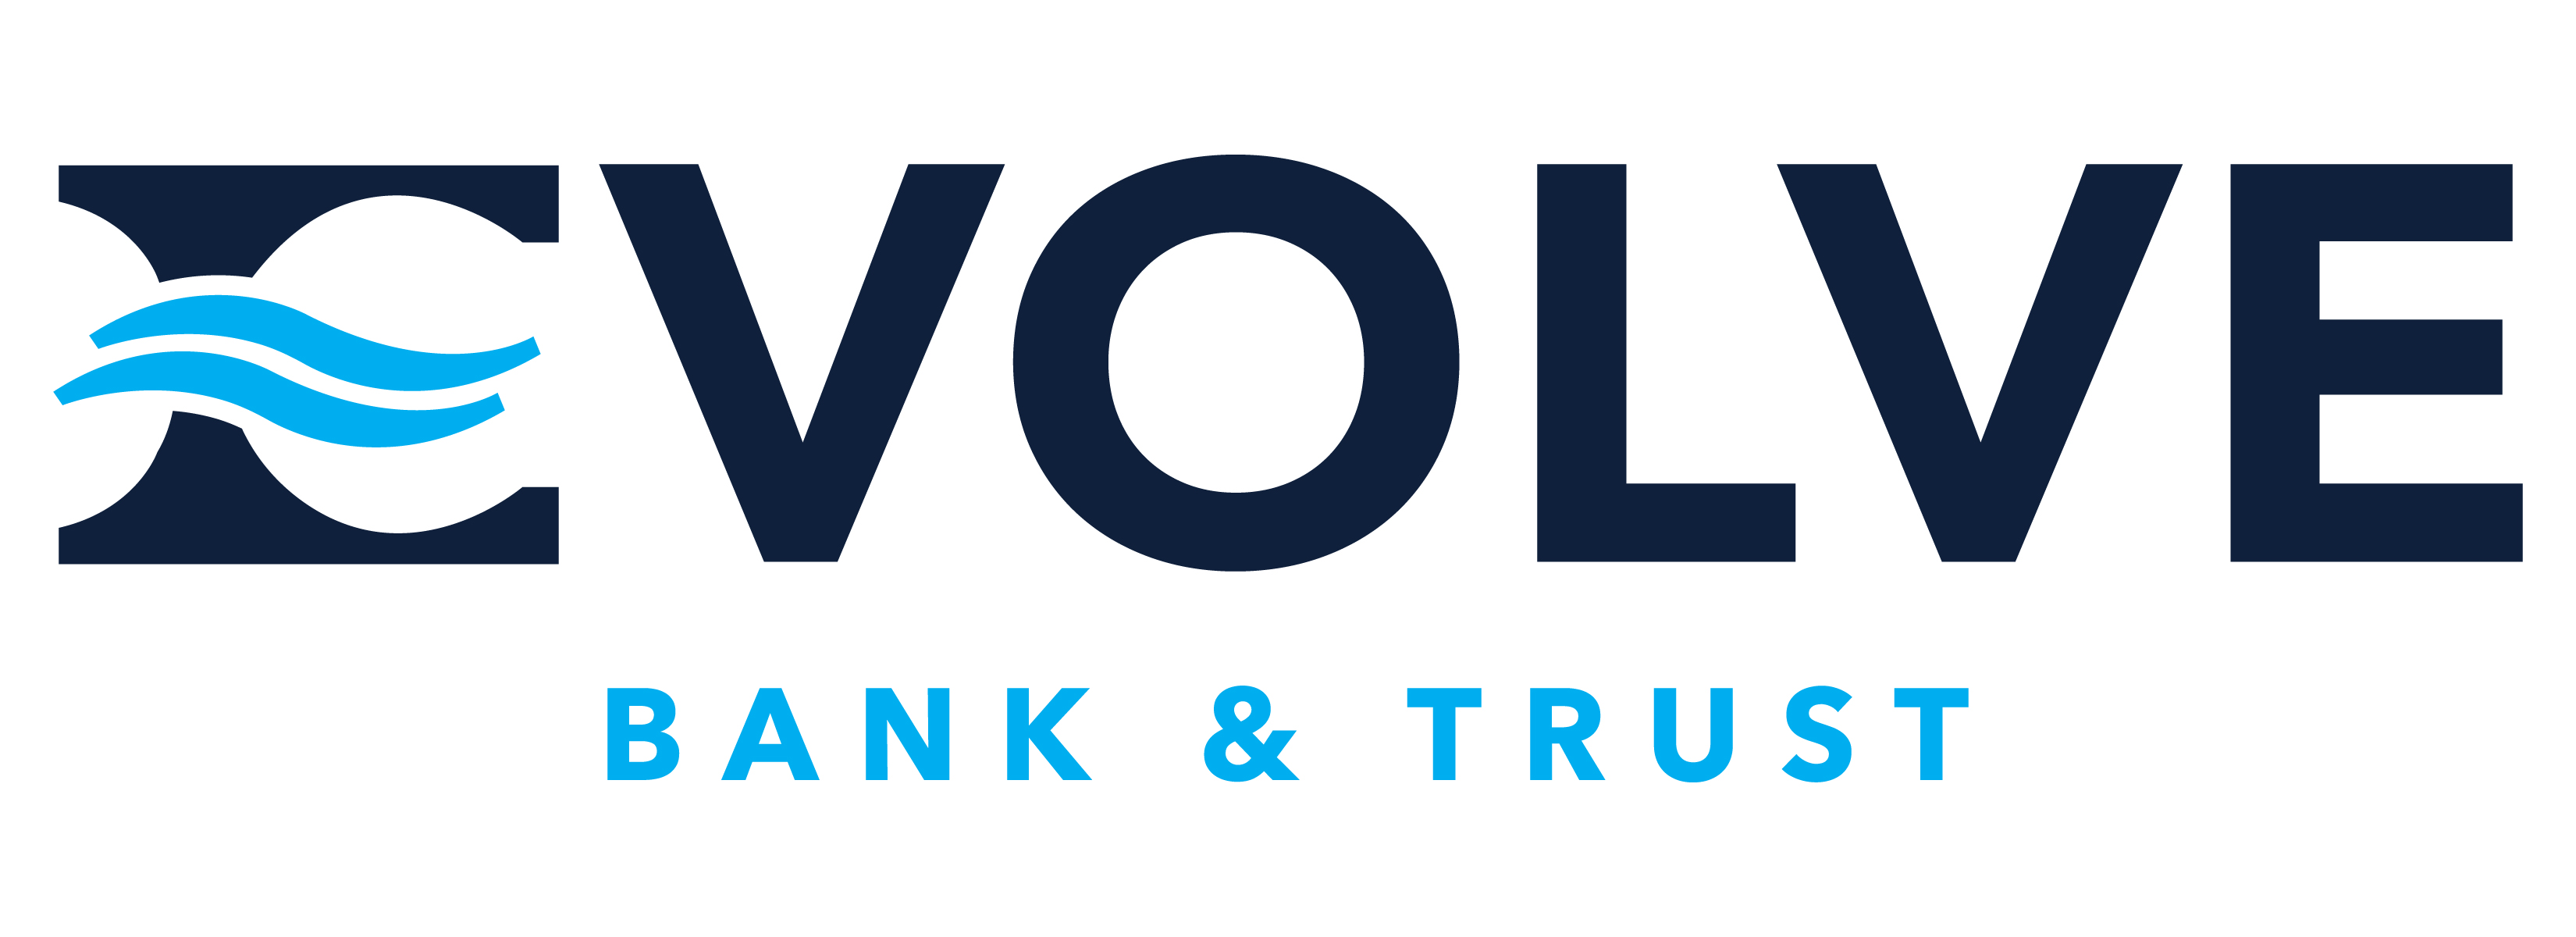 Featured Image for Evolve Bank & Trust